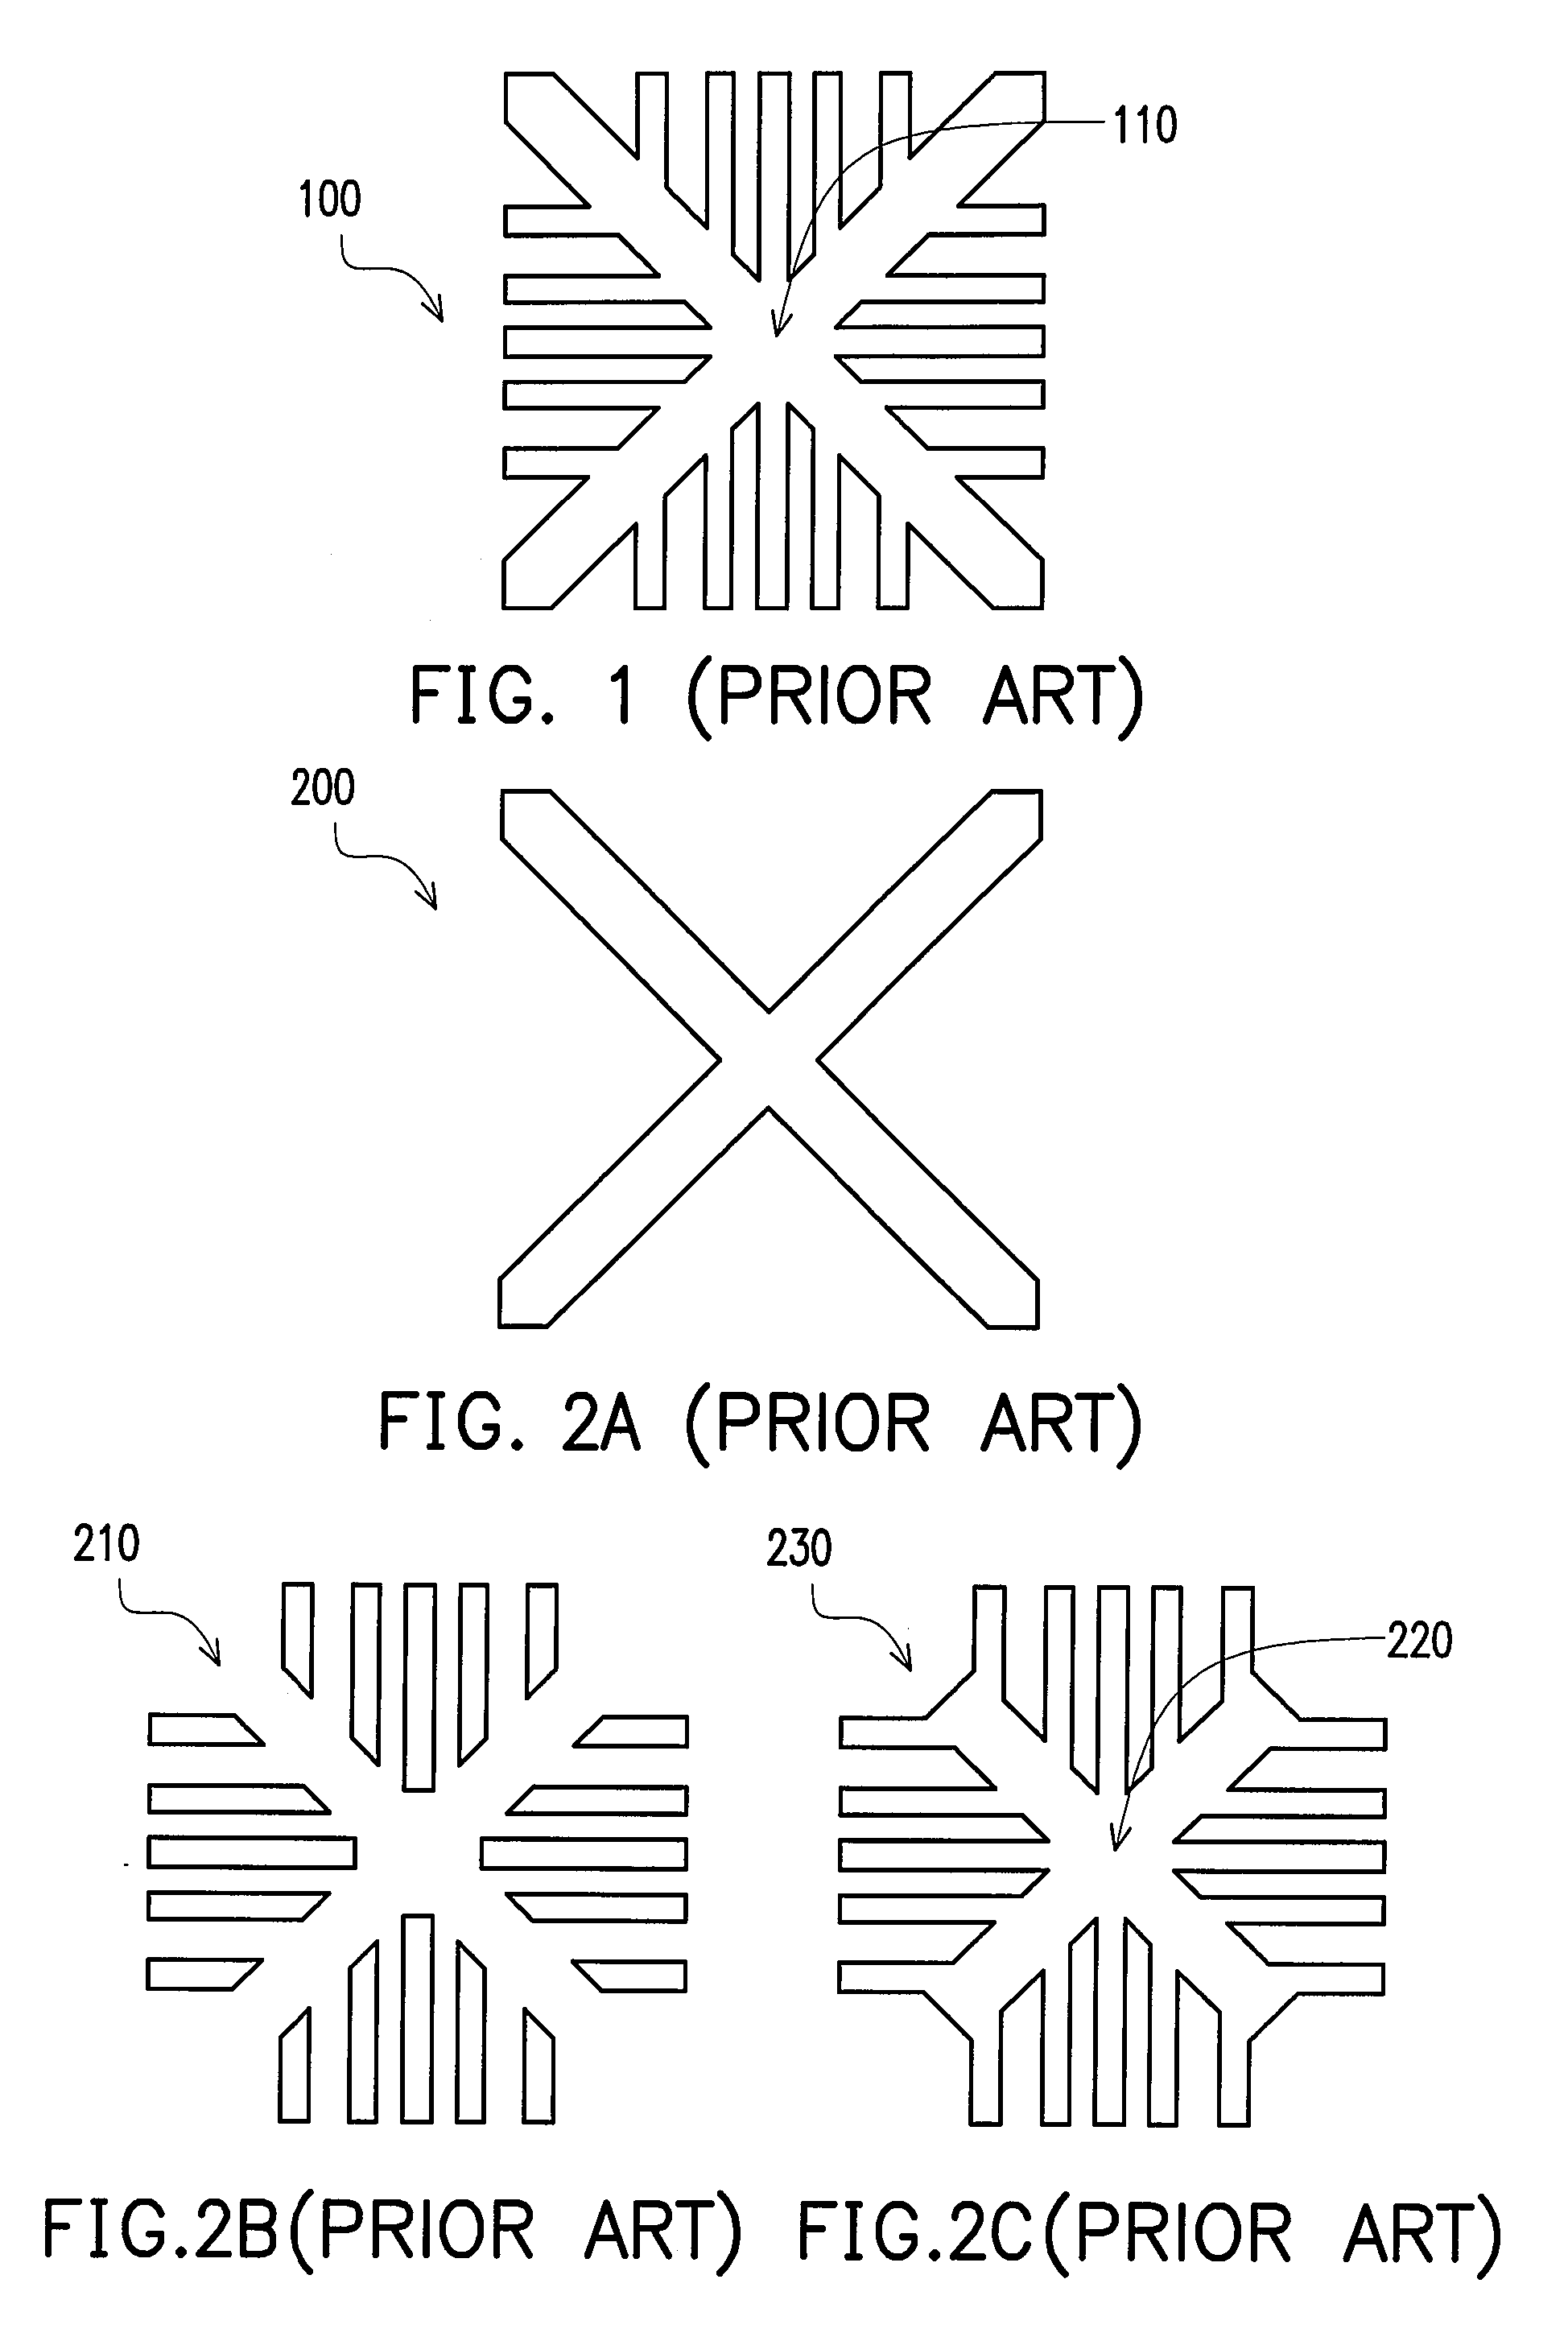 Conductive shielding pattern and semiconductor structure with inductor device